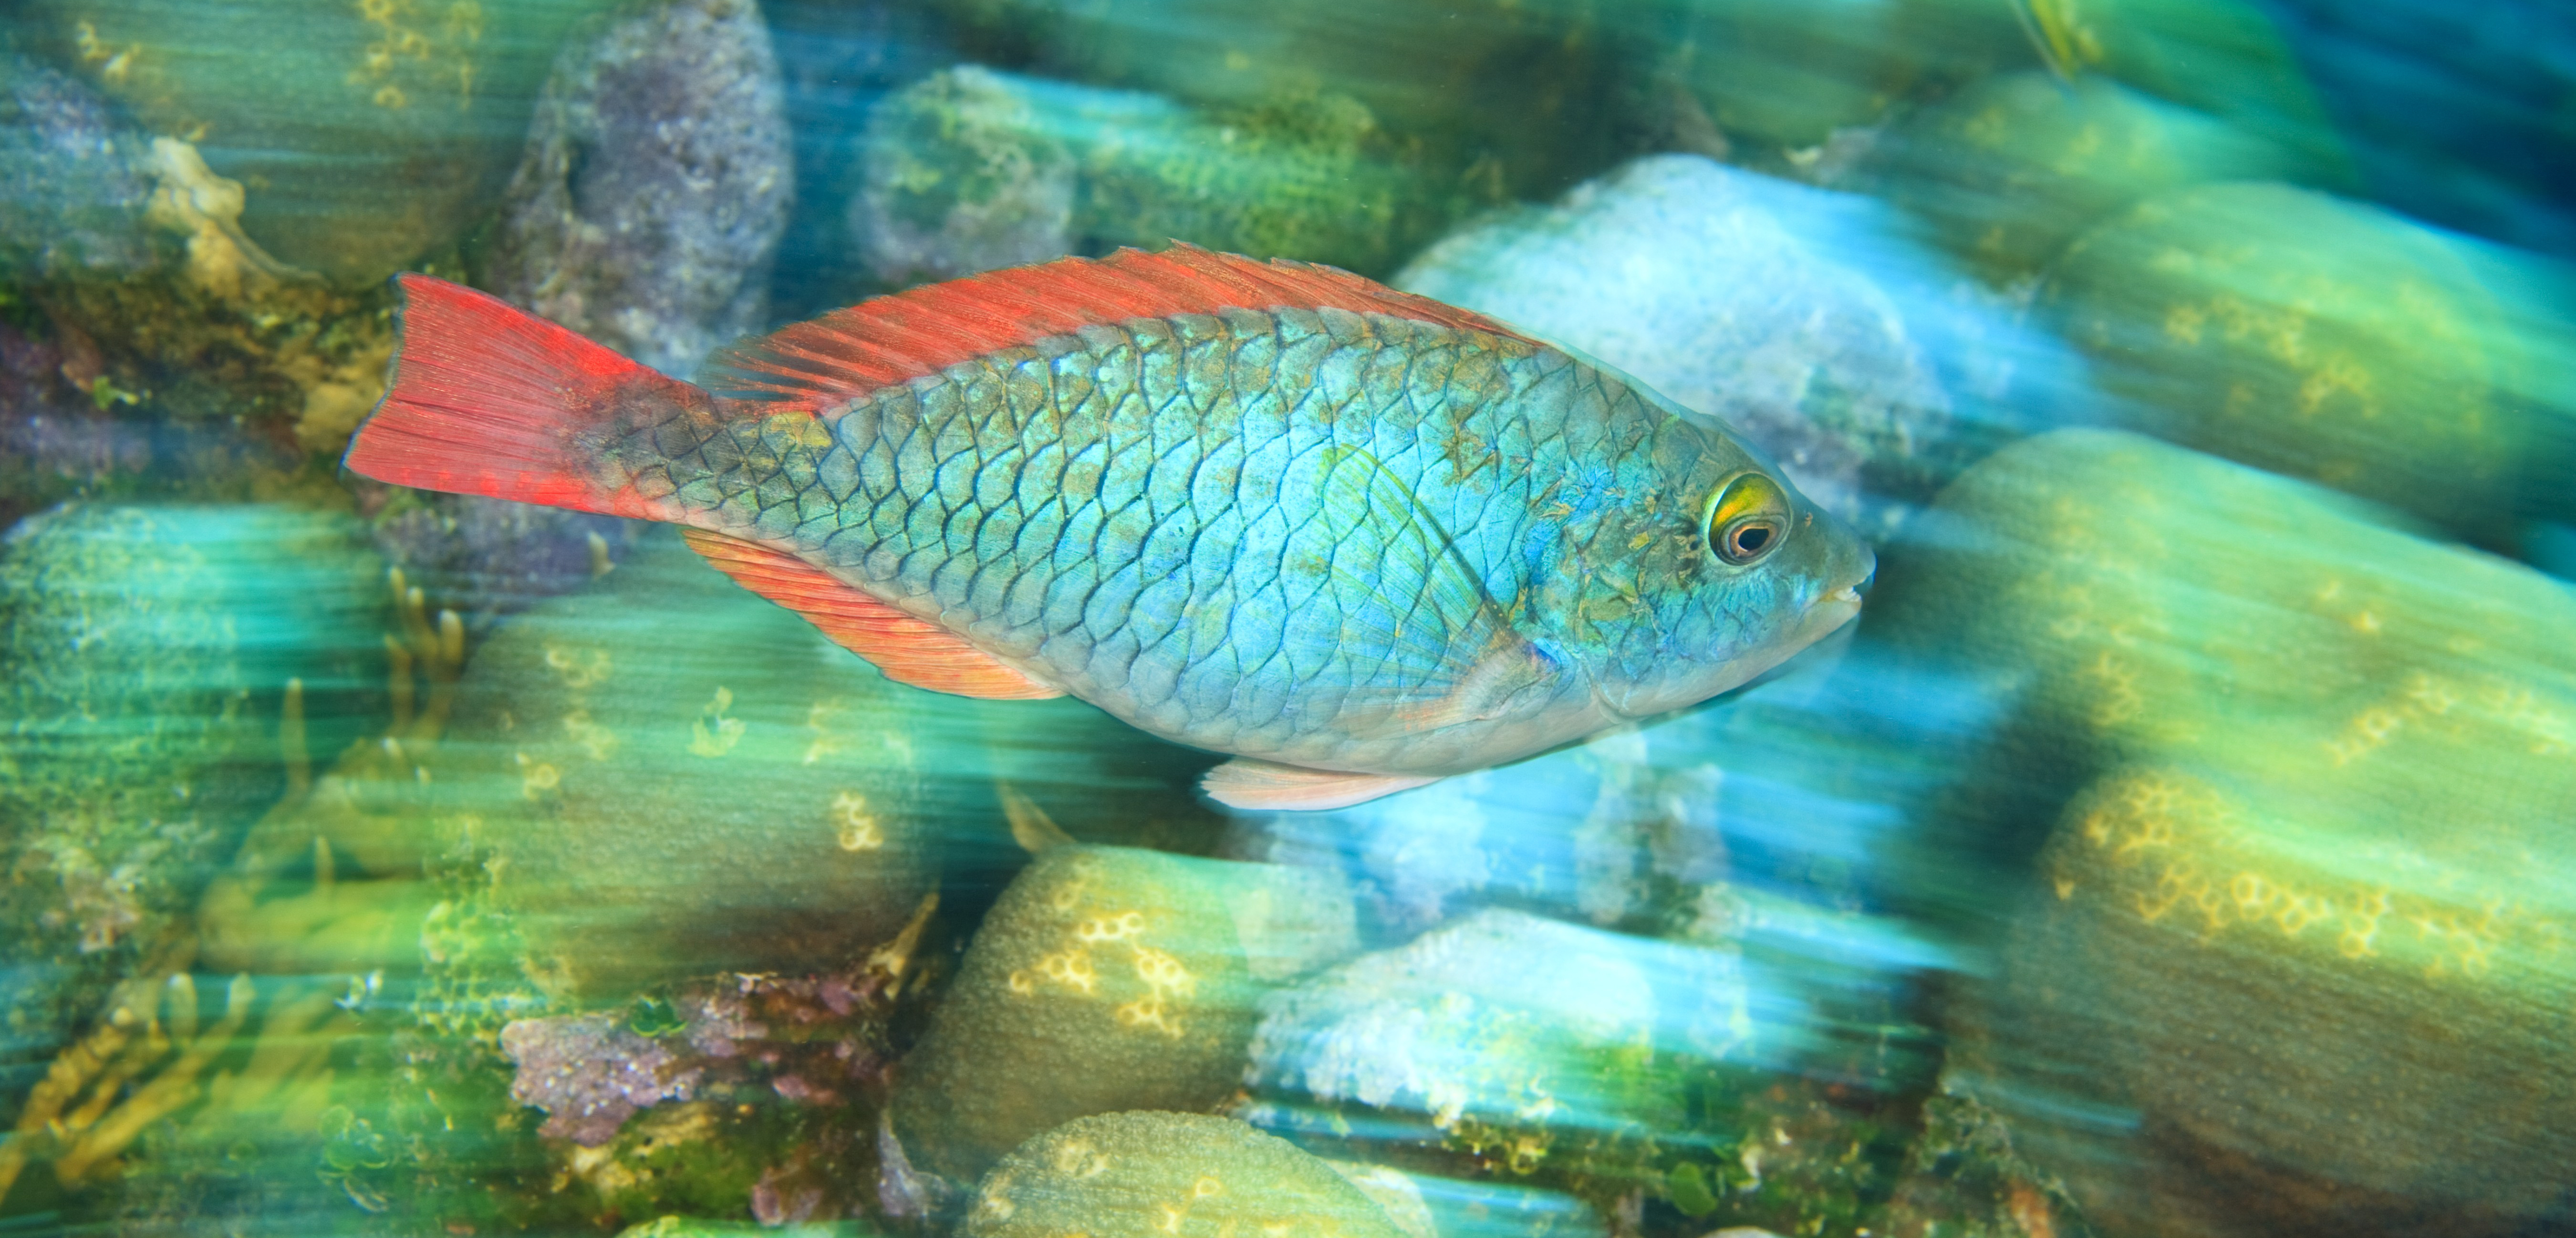 The Caribbean is home to dozens of species of parrotfish. These ecologically important fish help coral reefs stay healthy. Photo by Stuart Westmorland/Corbis